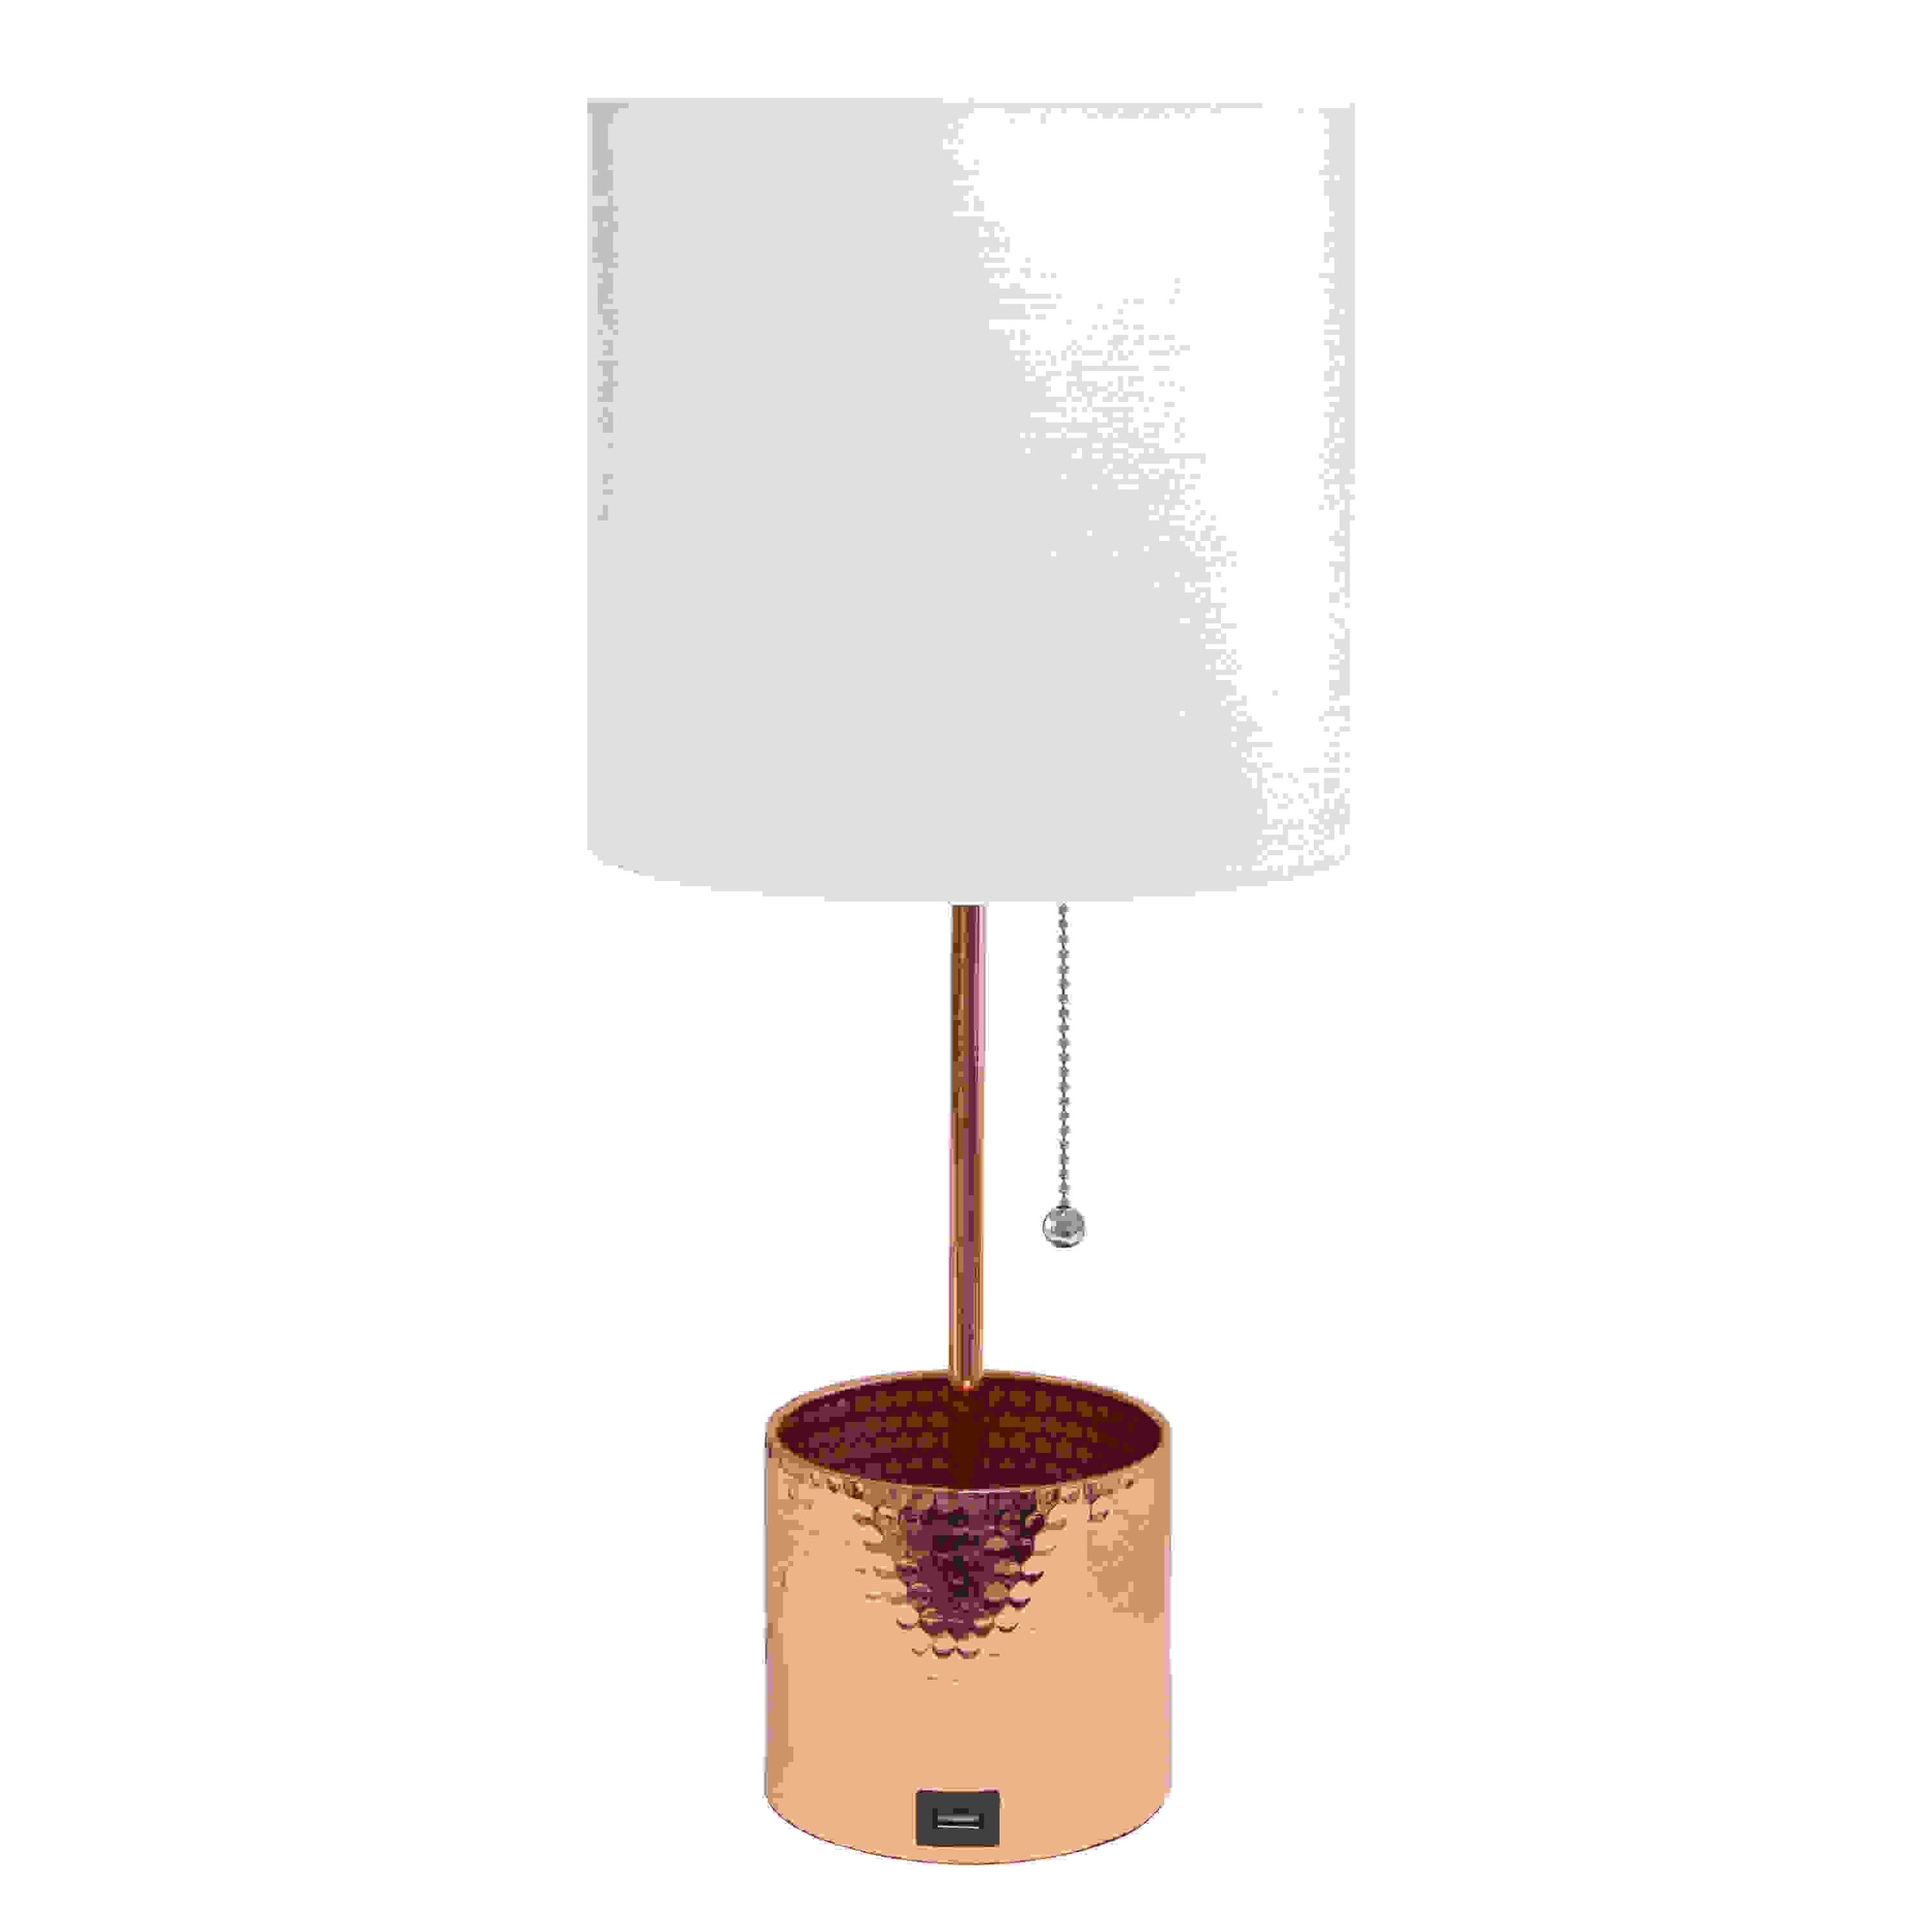 Simple Designs Hammered Metal Organizer Table Lamp with USB charging port and Fabric Shade, Rose Gold